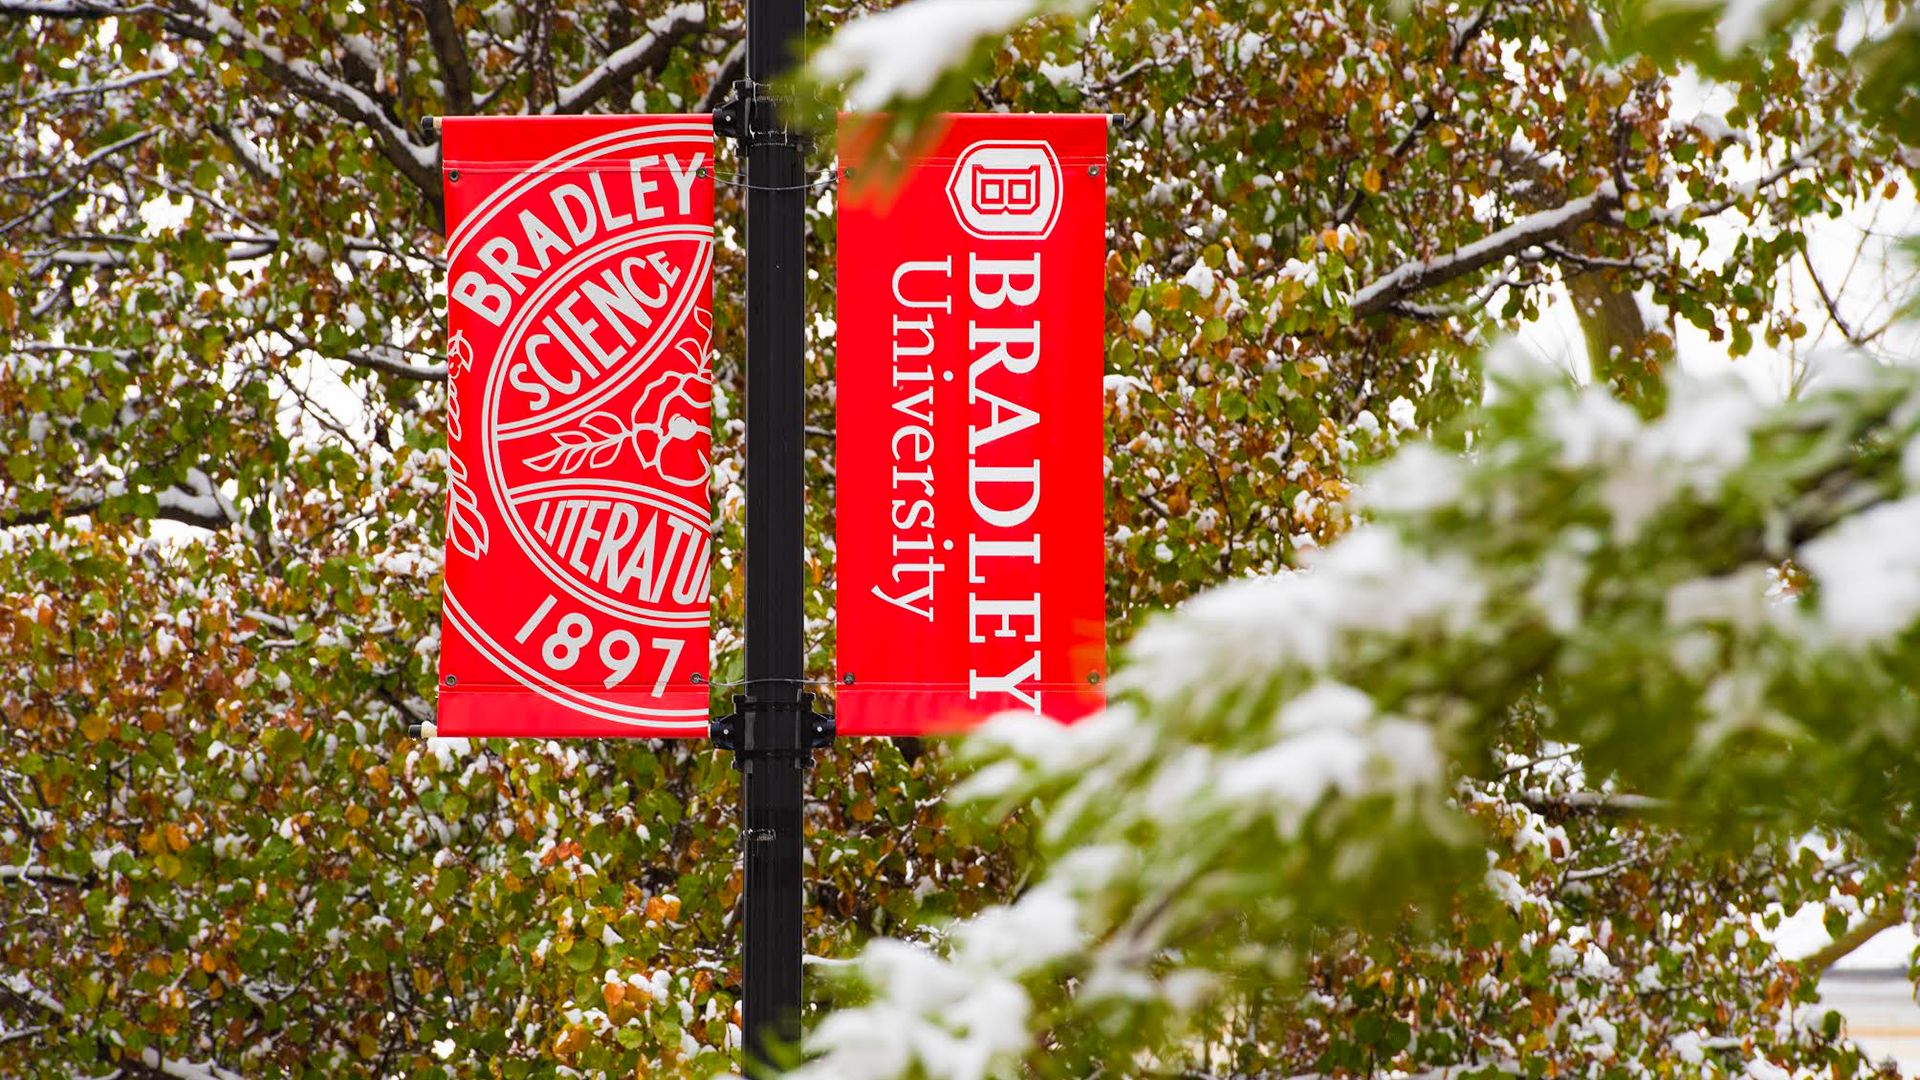 bradley-ranked-among-best-in-nation-for-internships-media-releases-communications-and-media